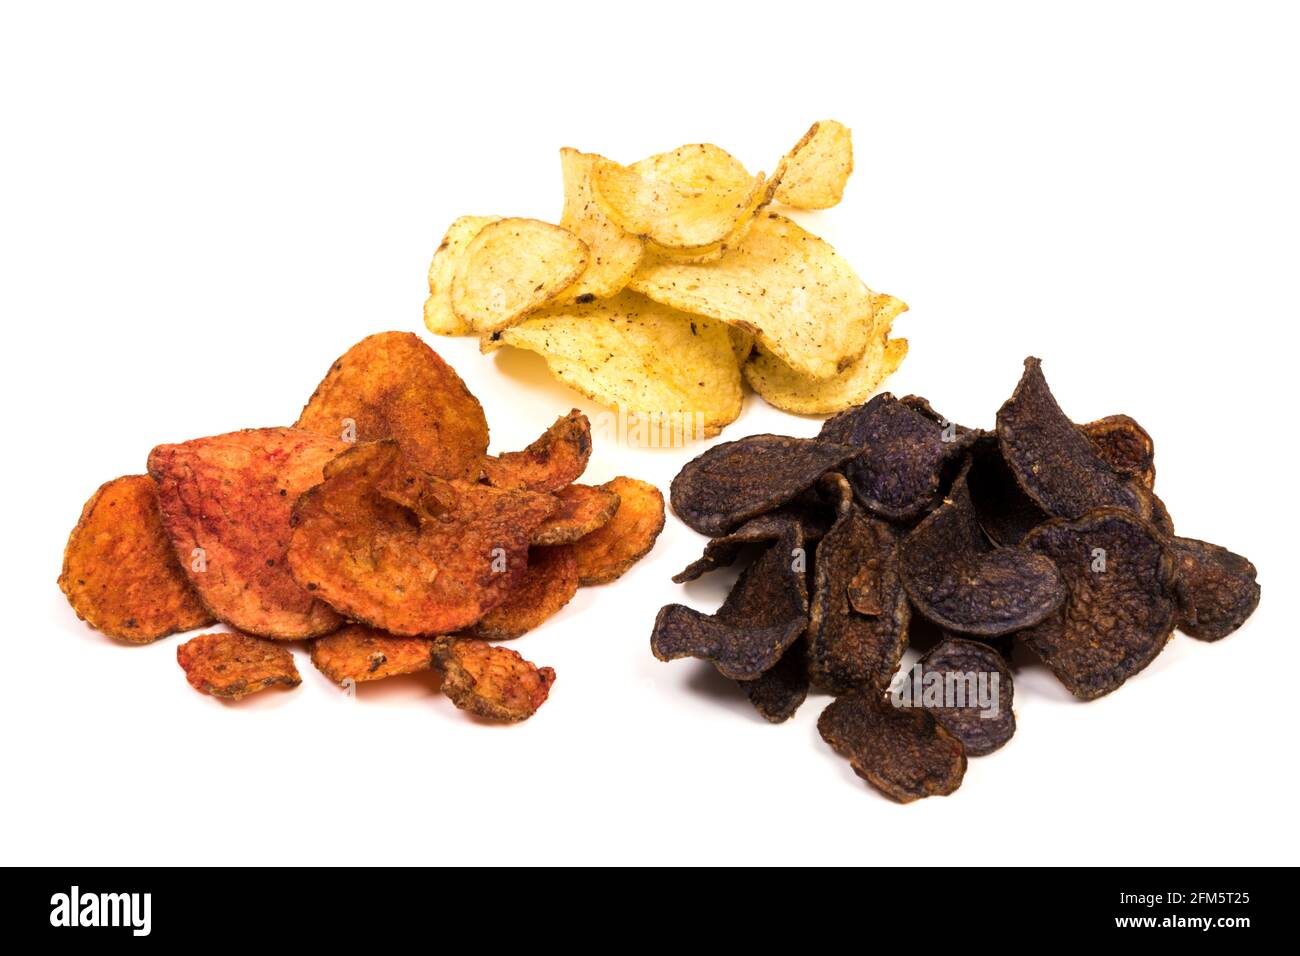 Three varieties of kettle-cooked potato chips, made of yellow, red and blue potatoes, isolated on white background Stock Photo